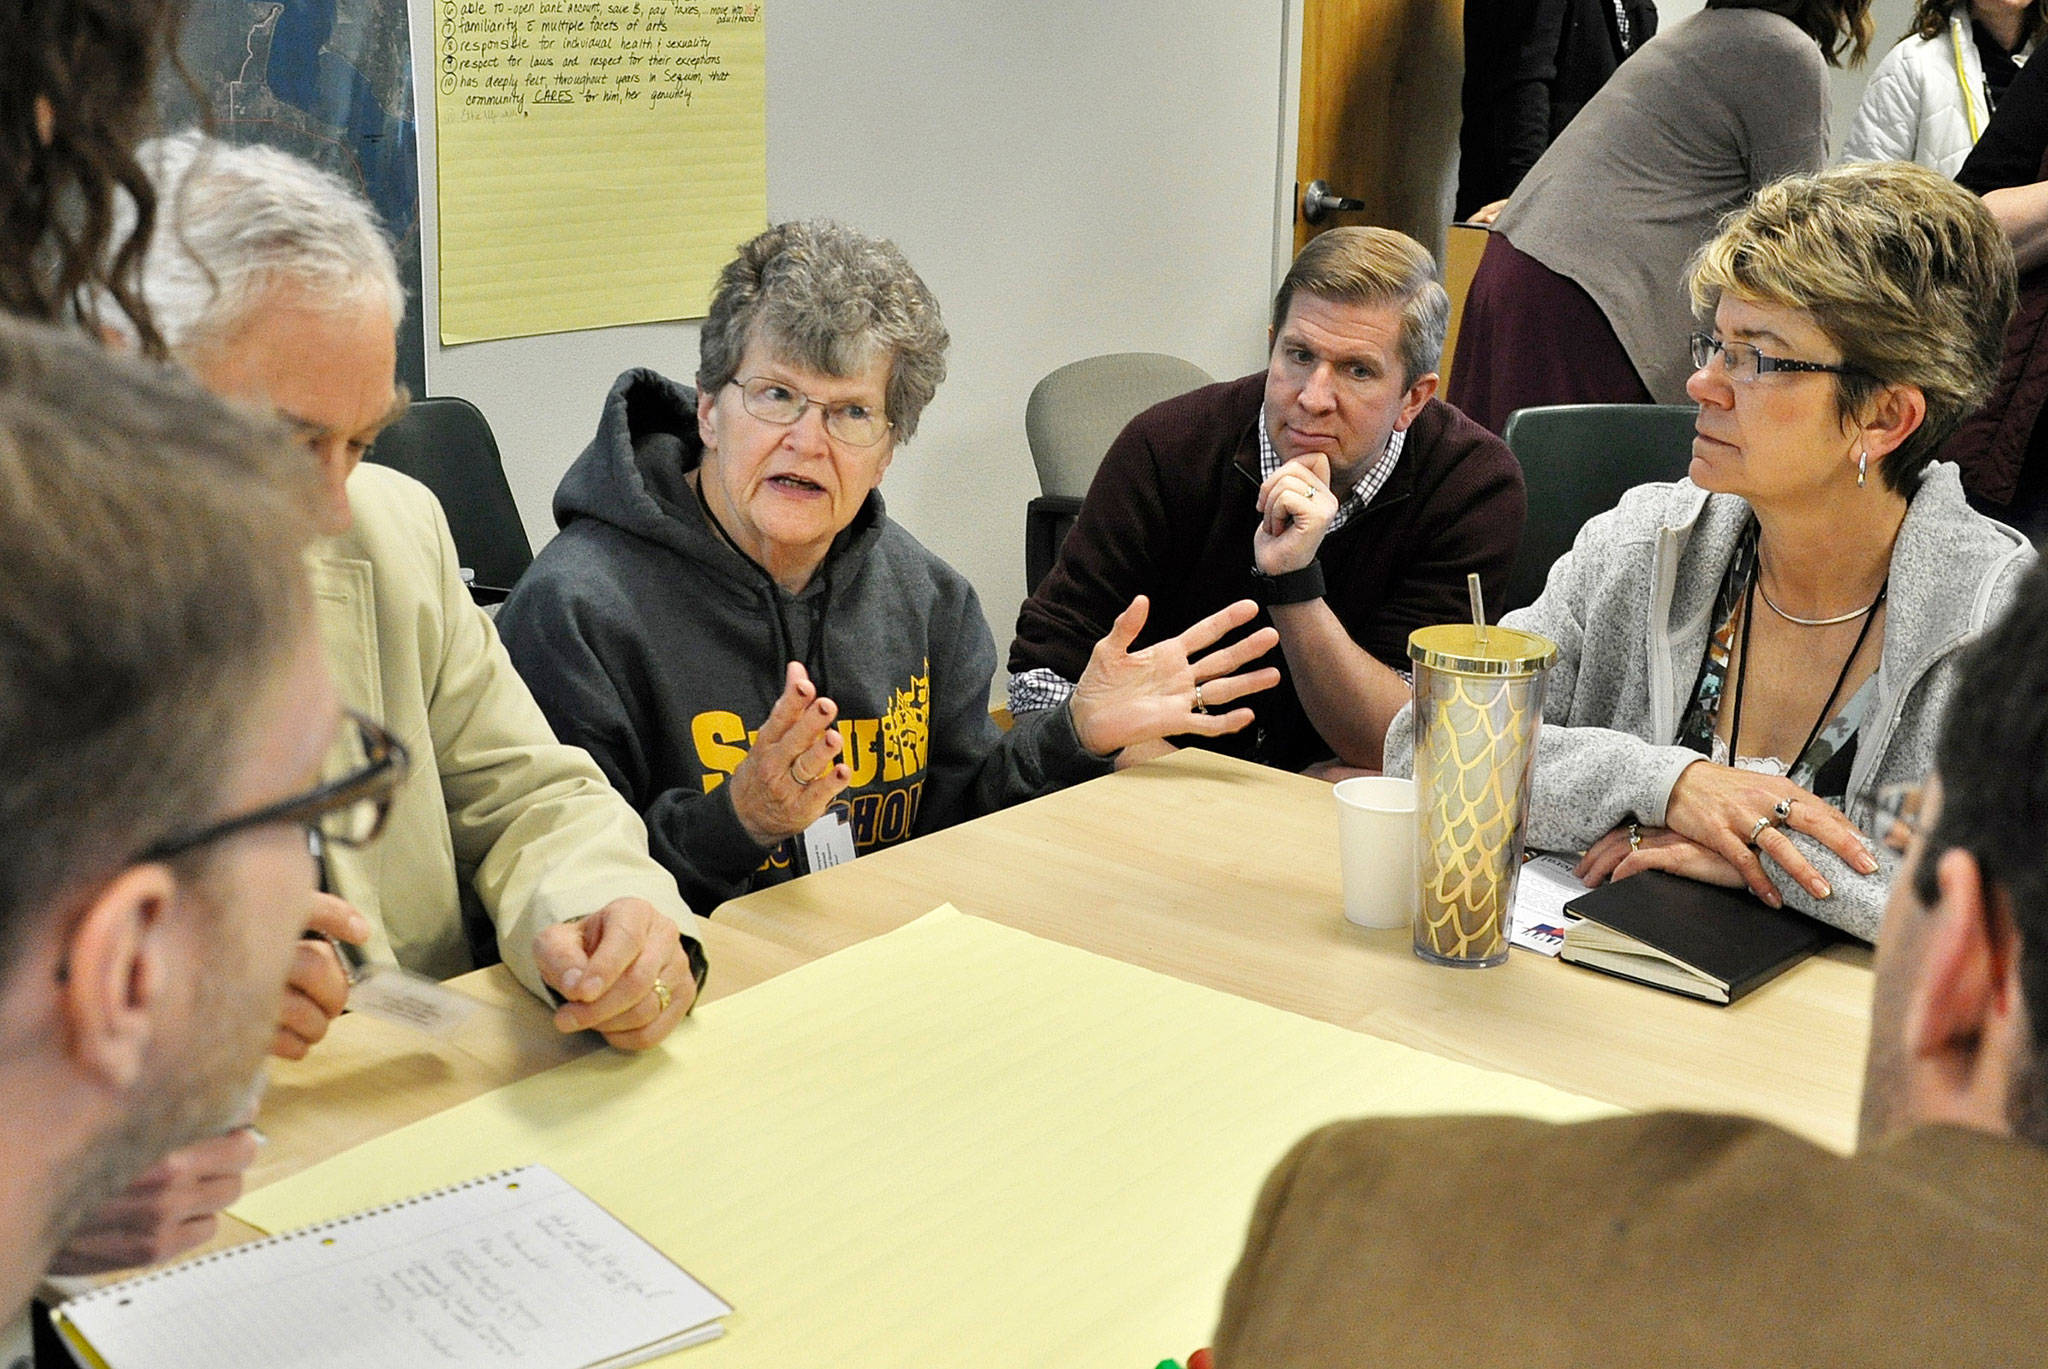 Members of the Sequim School District’s Strategic Planning Committee discuss issues at a recent meeting. From left are Jon Eekhoff, Brian Berg, Nola Judd, Charlie Bush, Monica Dixon and David Updike. (Patsene Dashiell/Sequim School District)